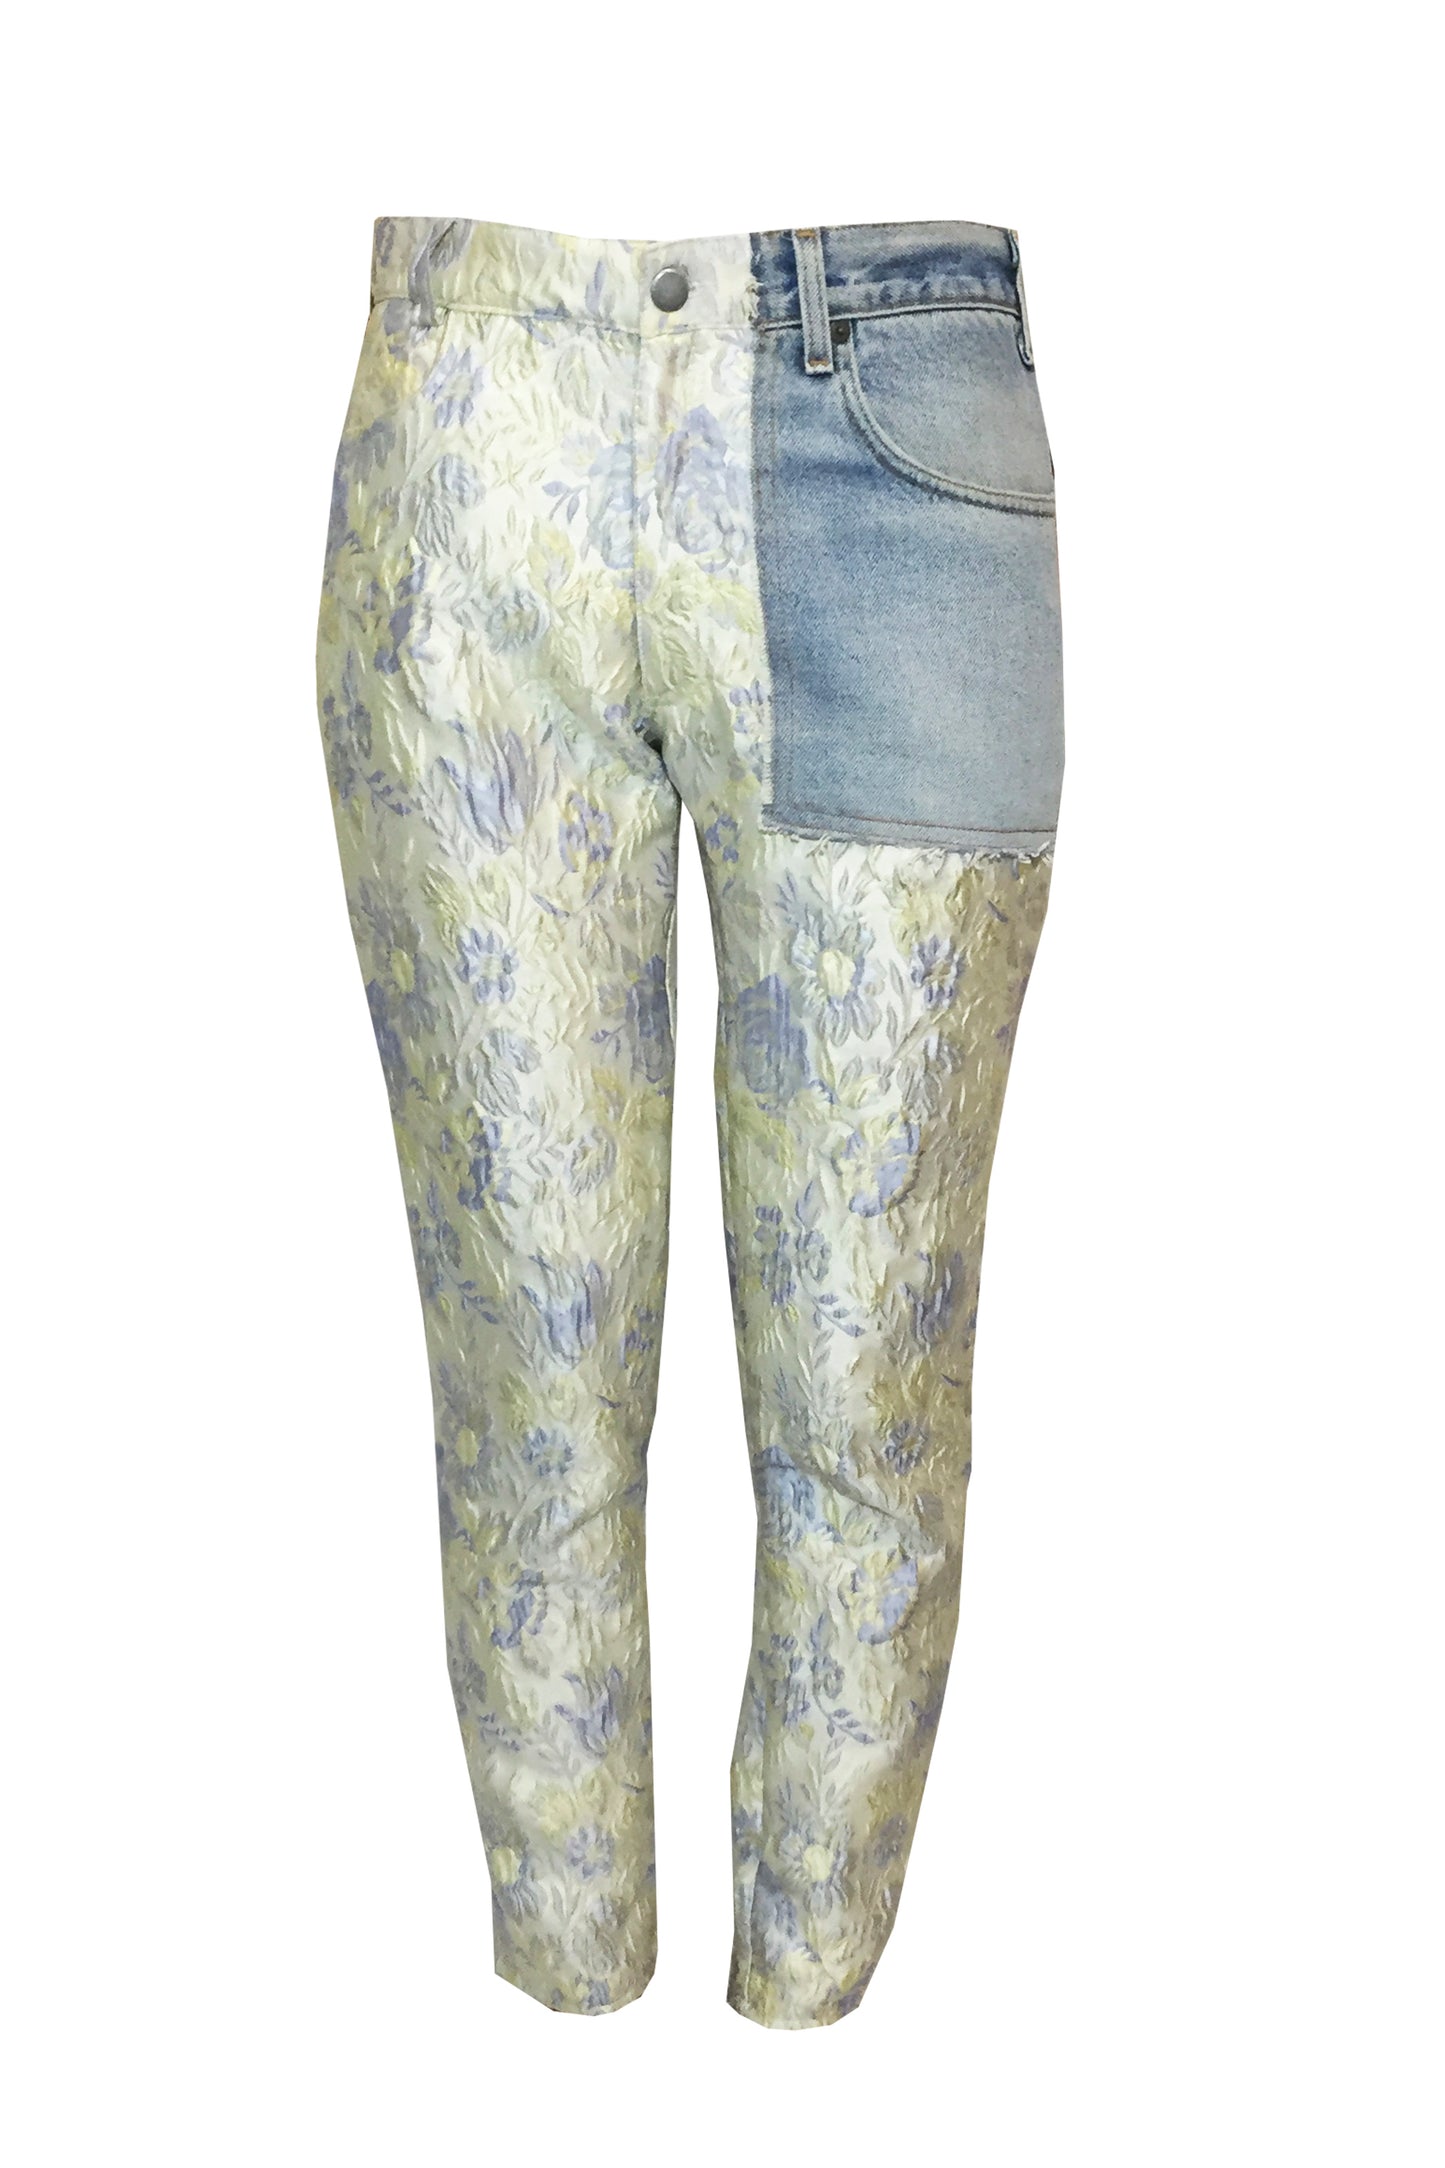 Jacquard pants with patched vintage jeans